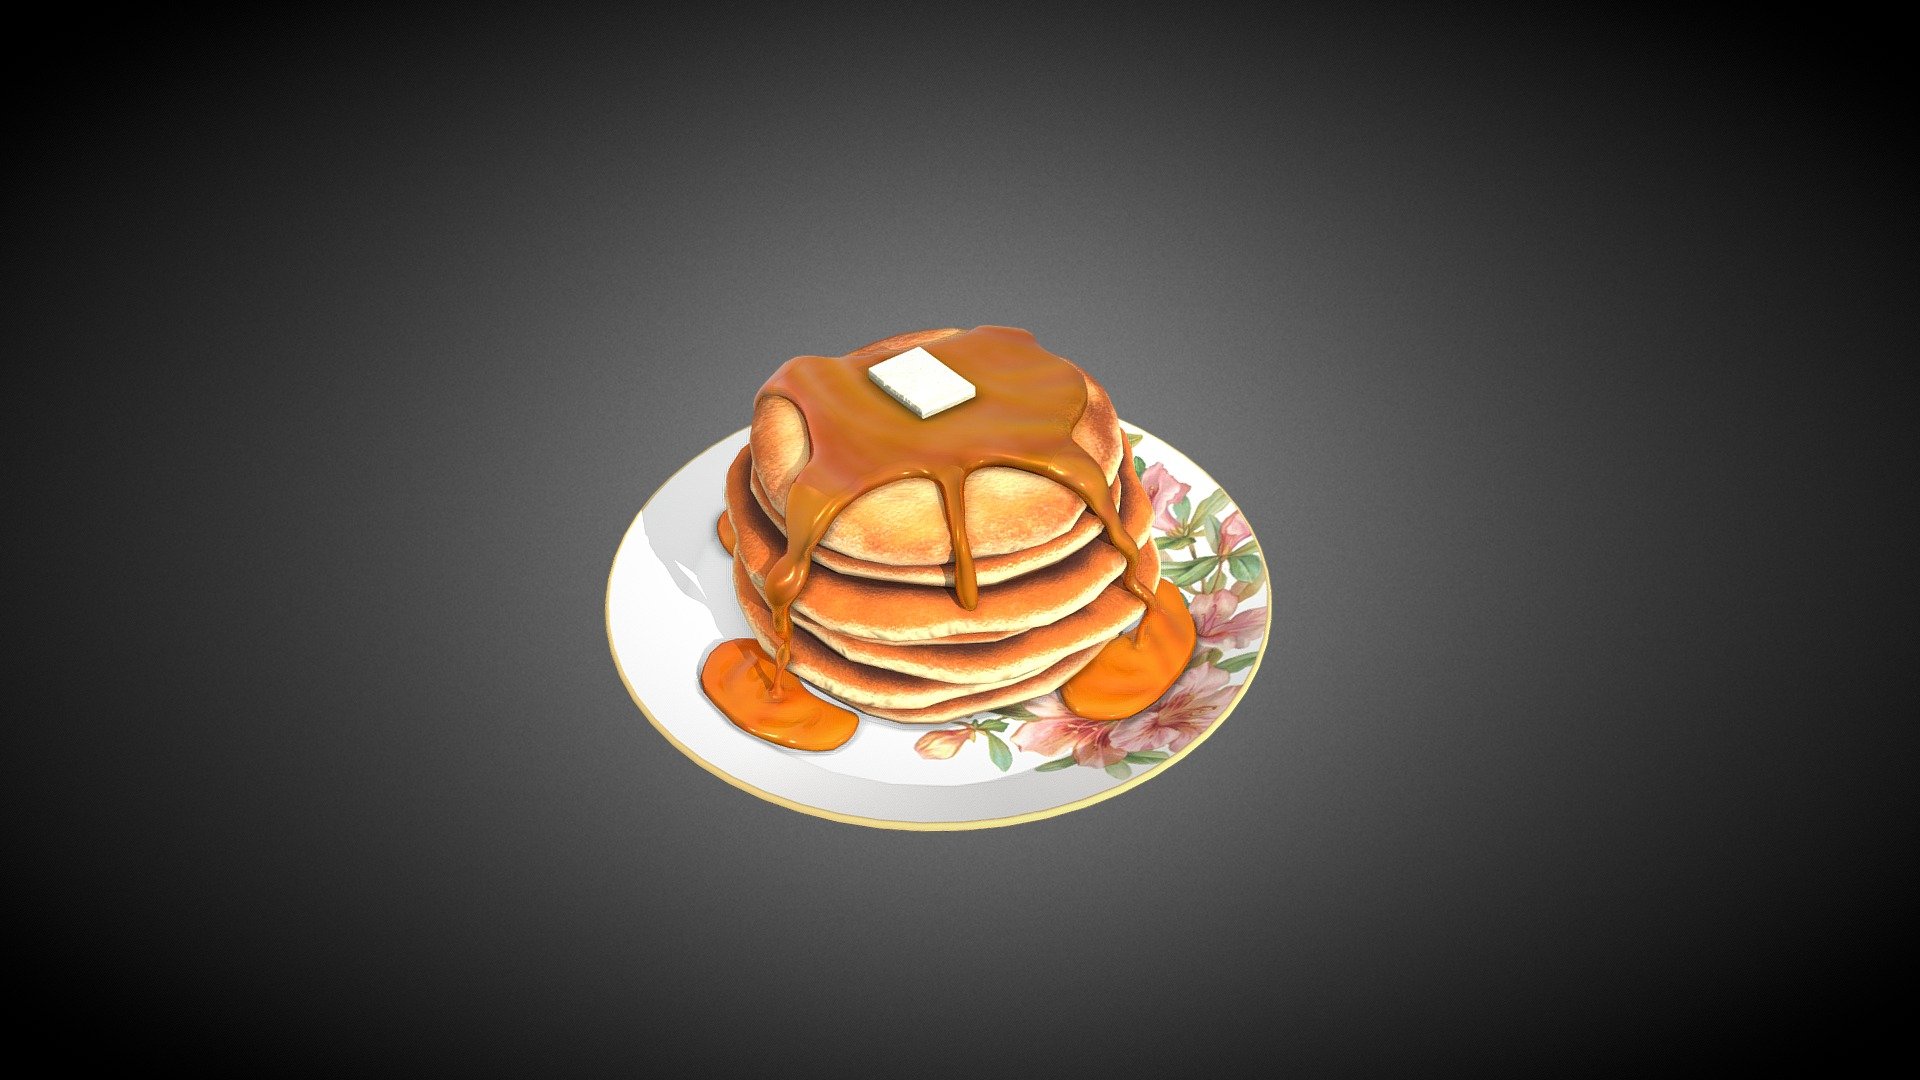 Fluffy American Pancake - Food PBR contains a low poly 3d model of food asset with High-Quality PBR textures to fill up your virtual environment,

Total Polygons - 7758

Total Tris - 15154

For Unity3d (Built-in, URP, HDRP) Ready Assets visit our Unity Asset Store Page

Enjoy and please rate the asset!

Contact us on for AR/VR related queries and development support

Gmail - designer@devdensolutions.com

Website

Twitter

Instagram

Facebook

Linkedin

Youtube - Fluffy American Pancake - Buy Royalty Free 3D model by Devden 3d model